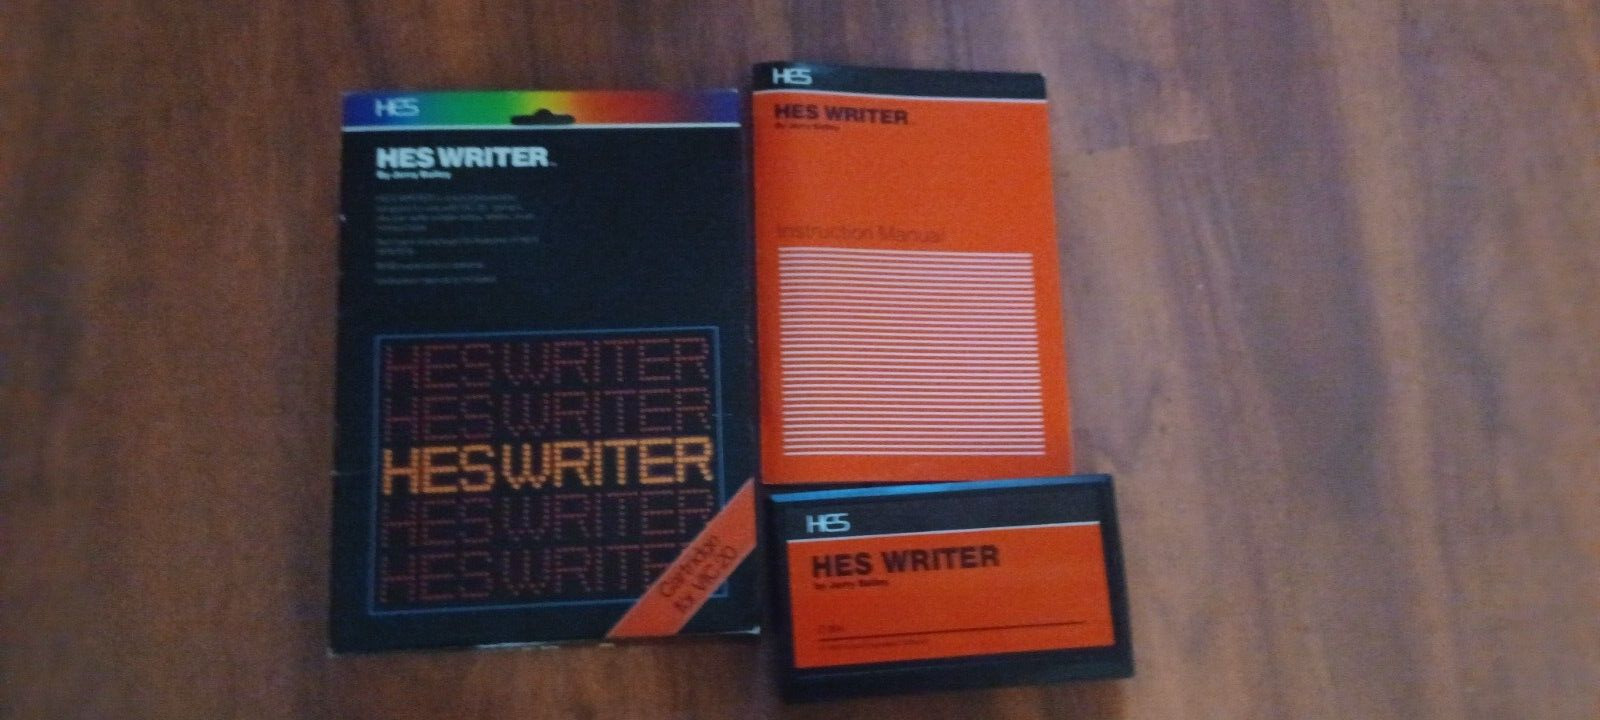 1982 Commodore vic 20 HES Writer, word processing program complete works great